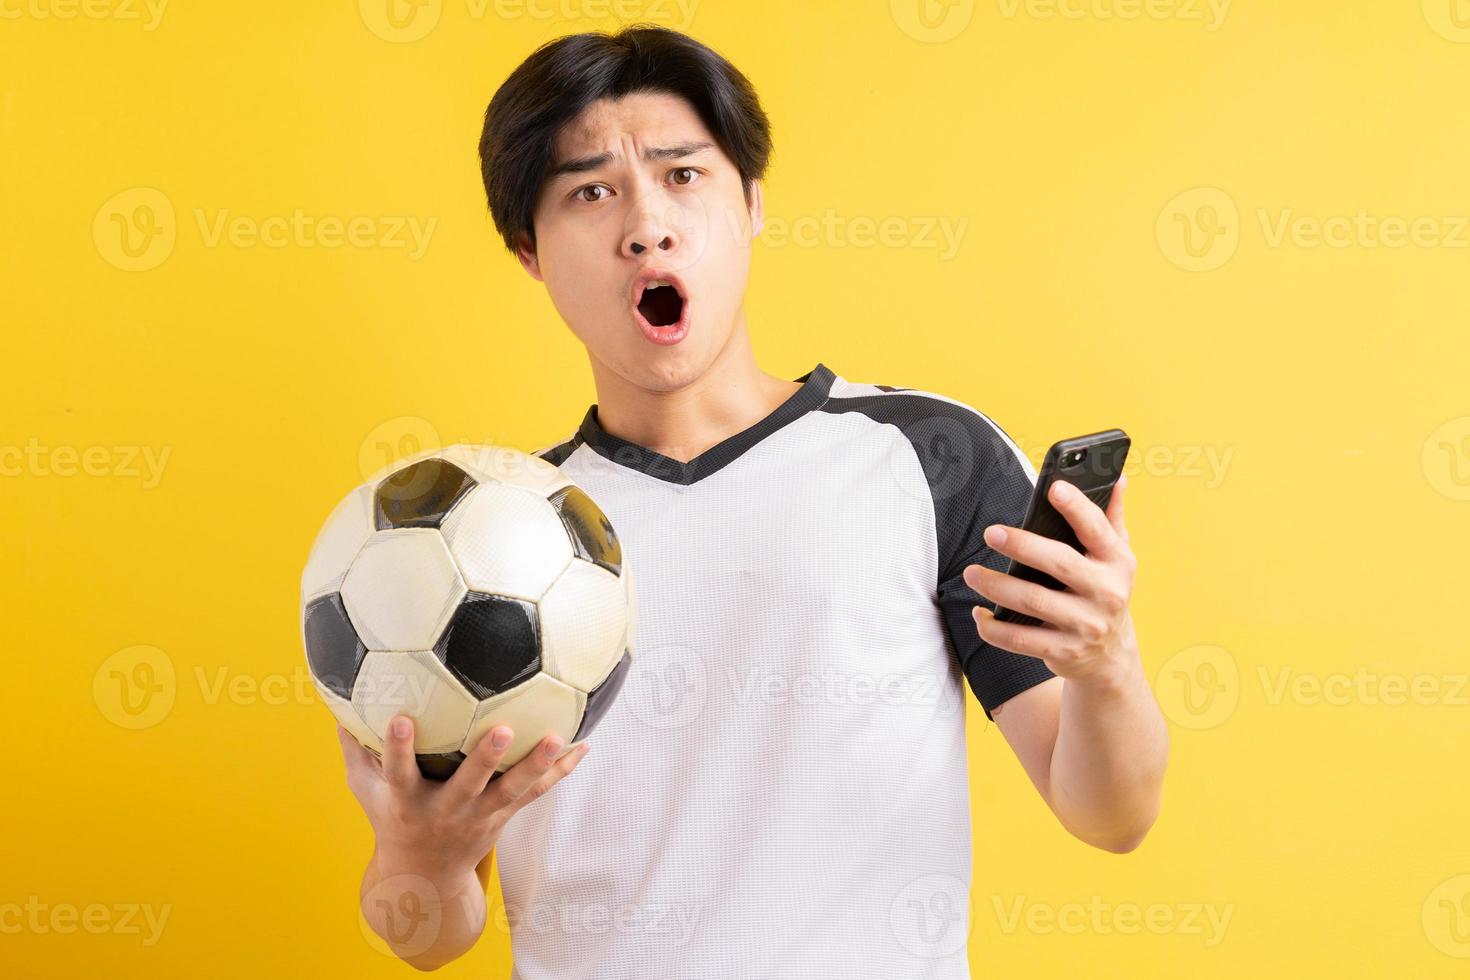 Asian man is holding a ball and holding a phone in his hand photo